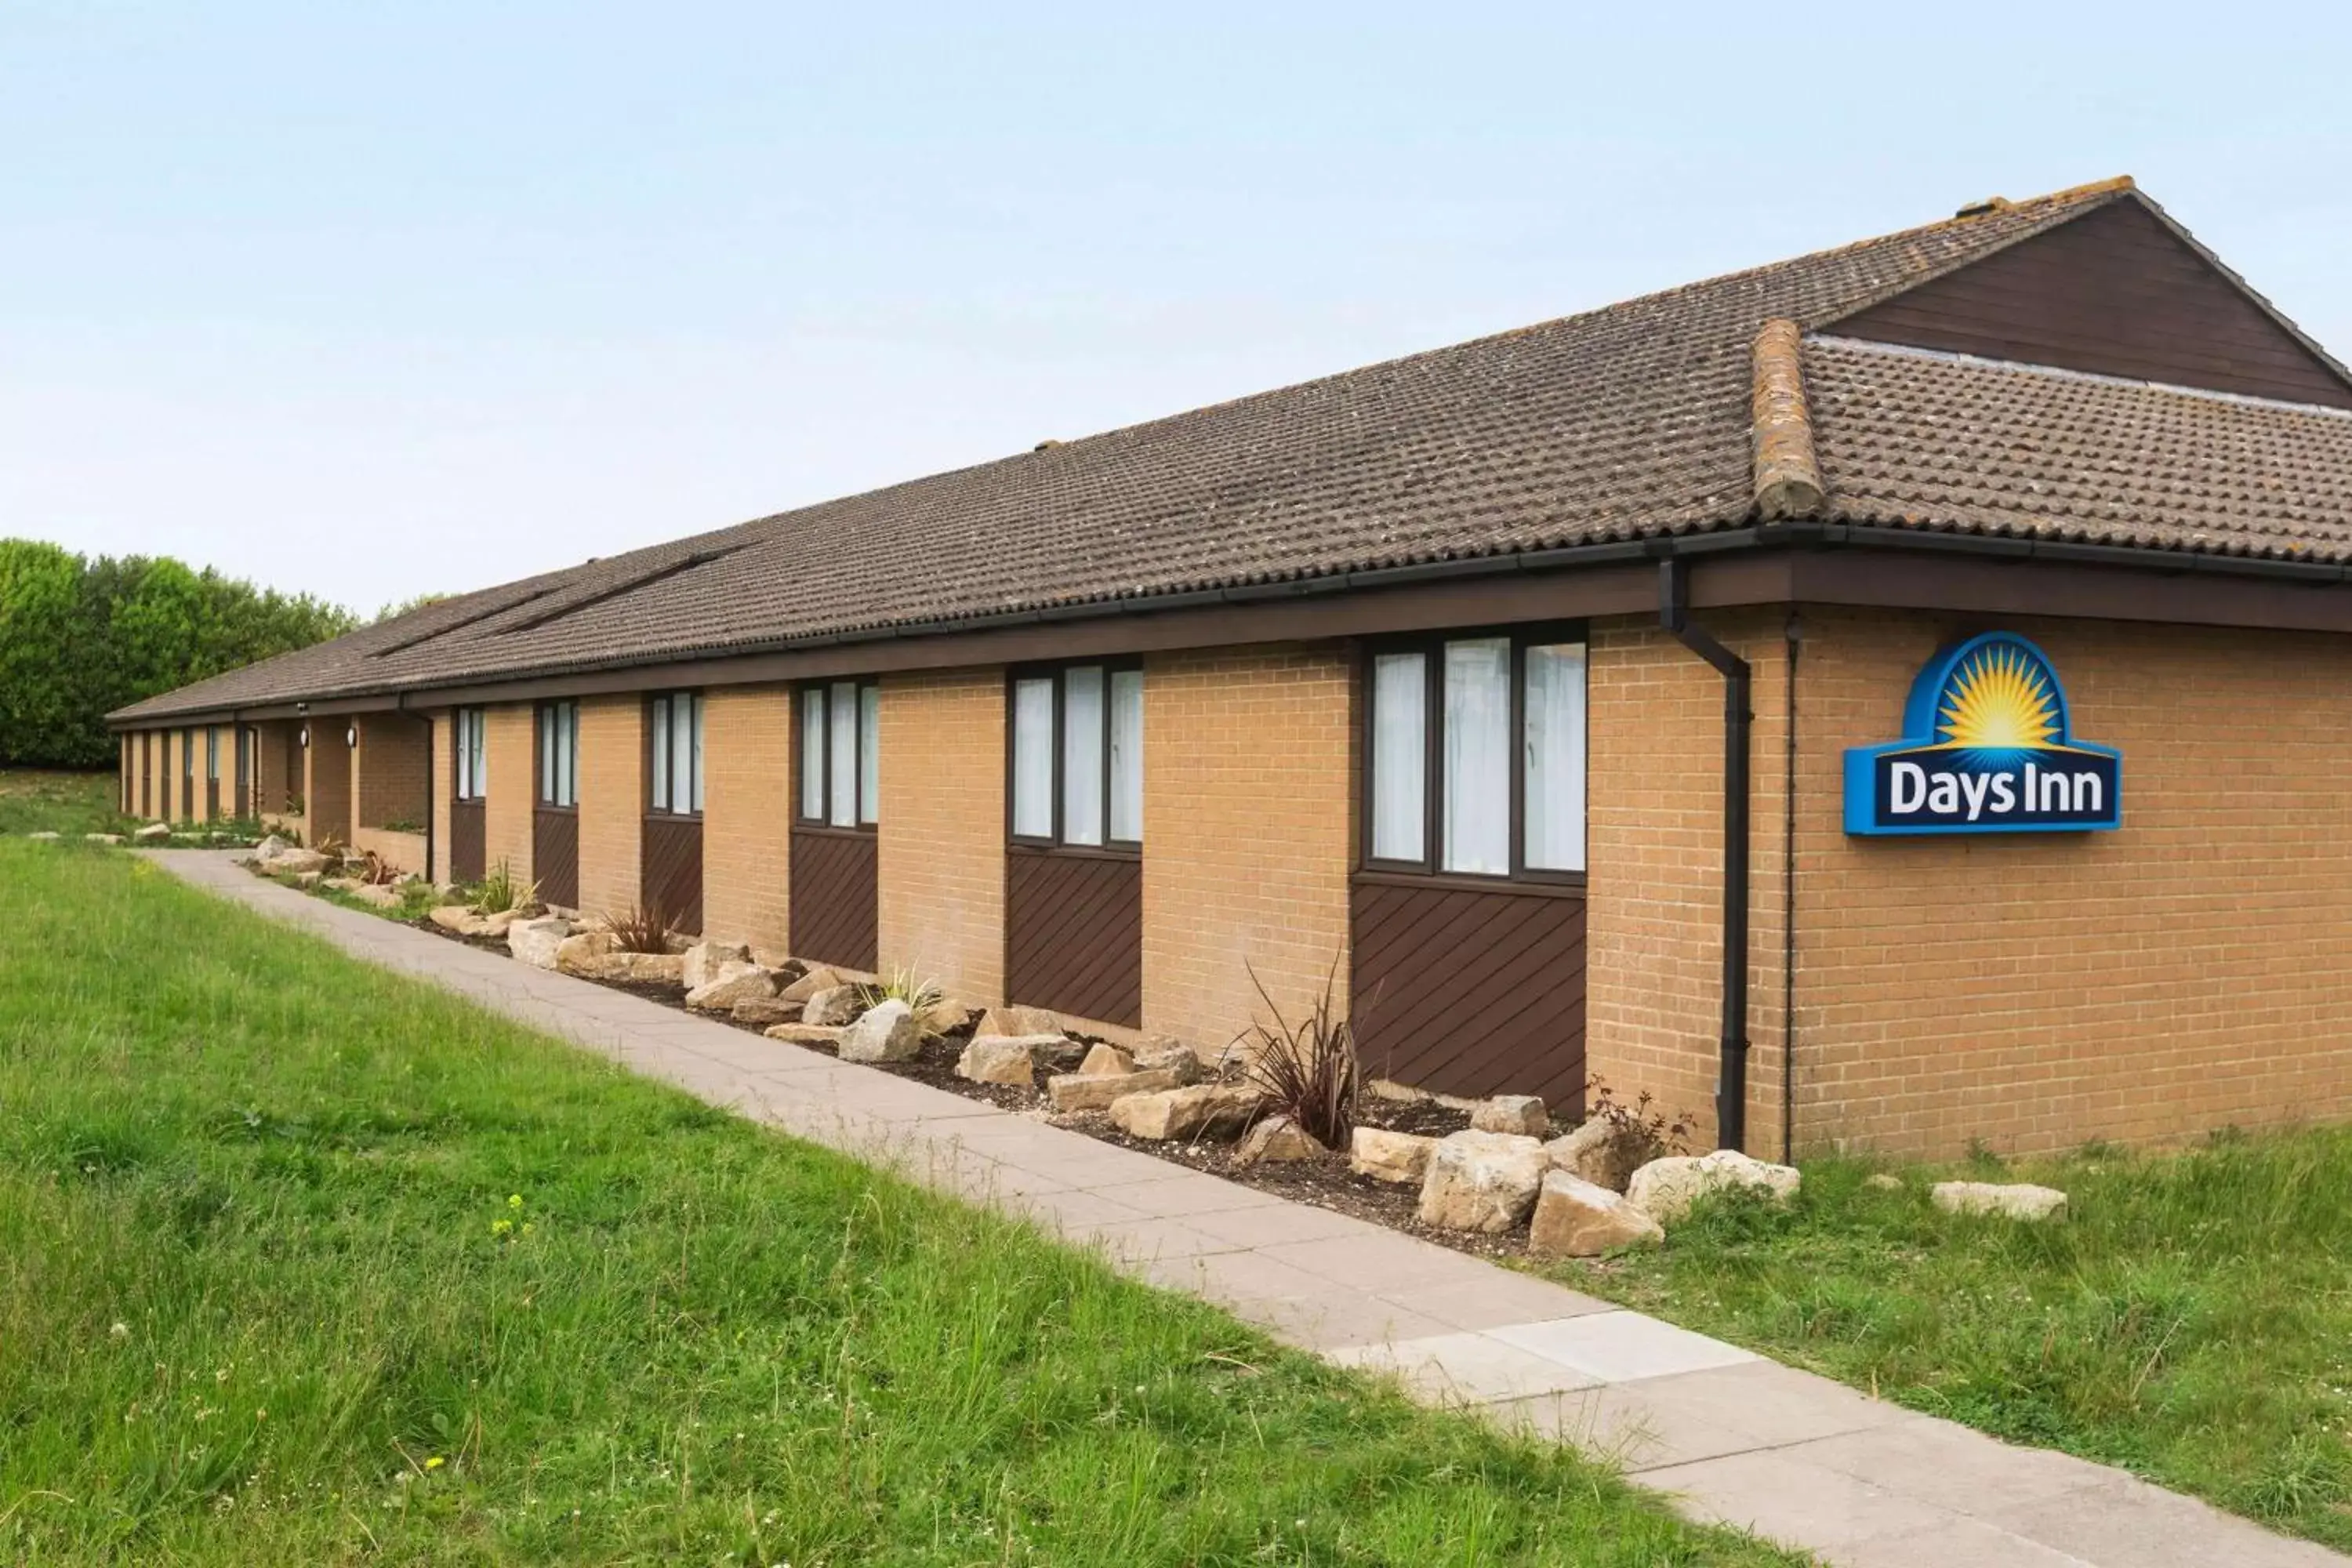 Property building in Days Inn Sutton Scotney South